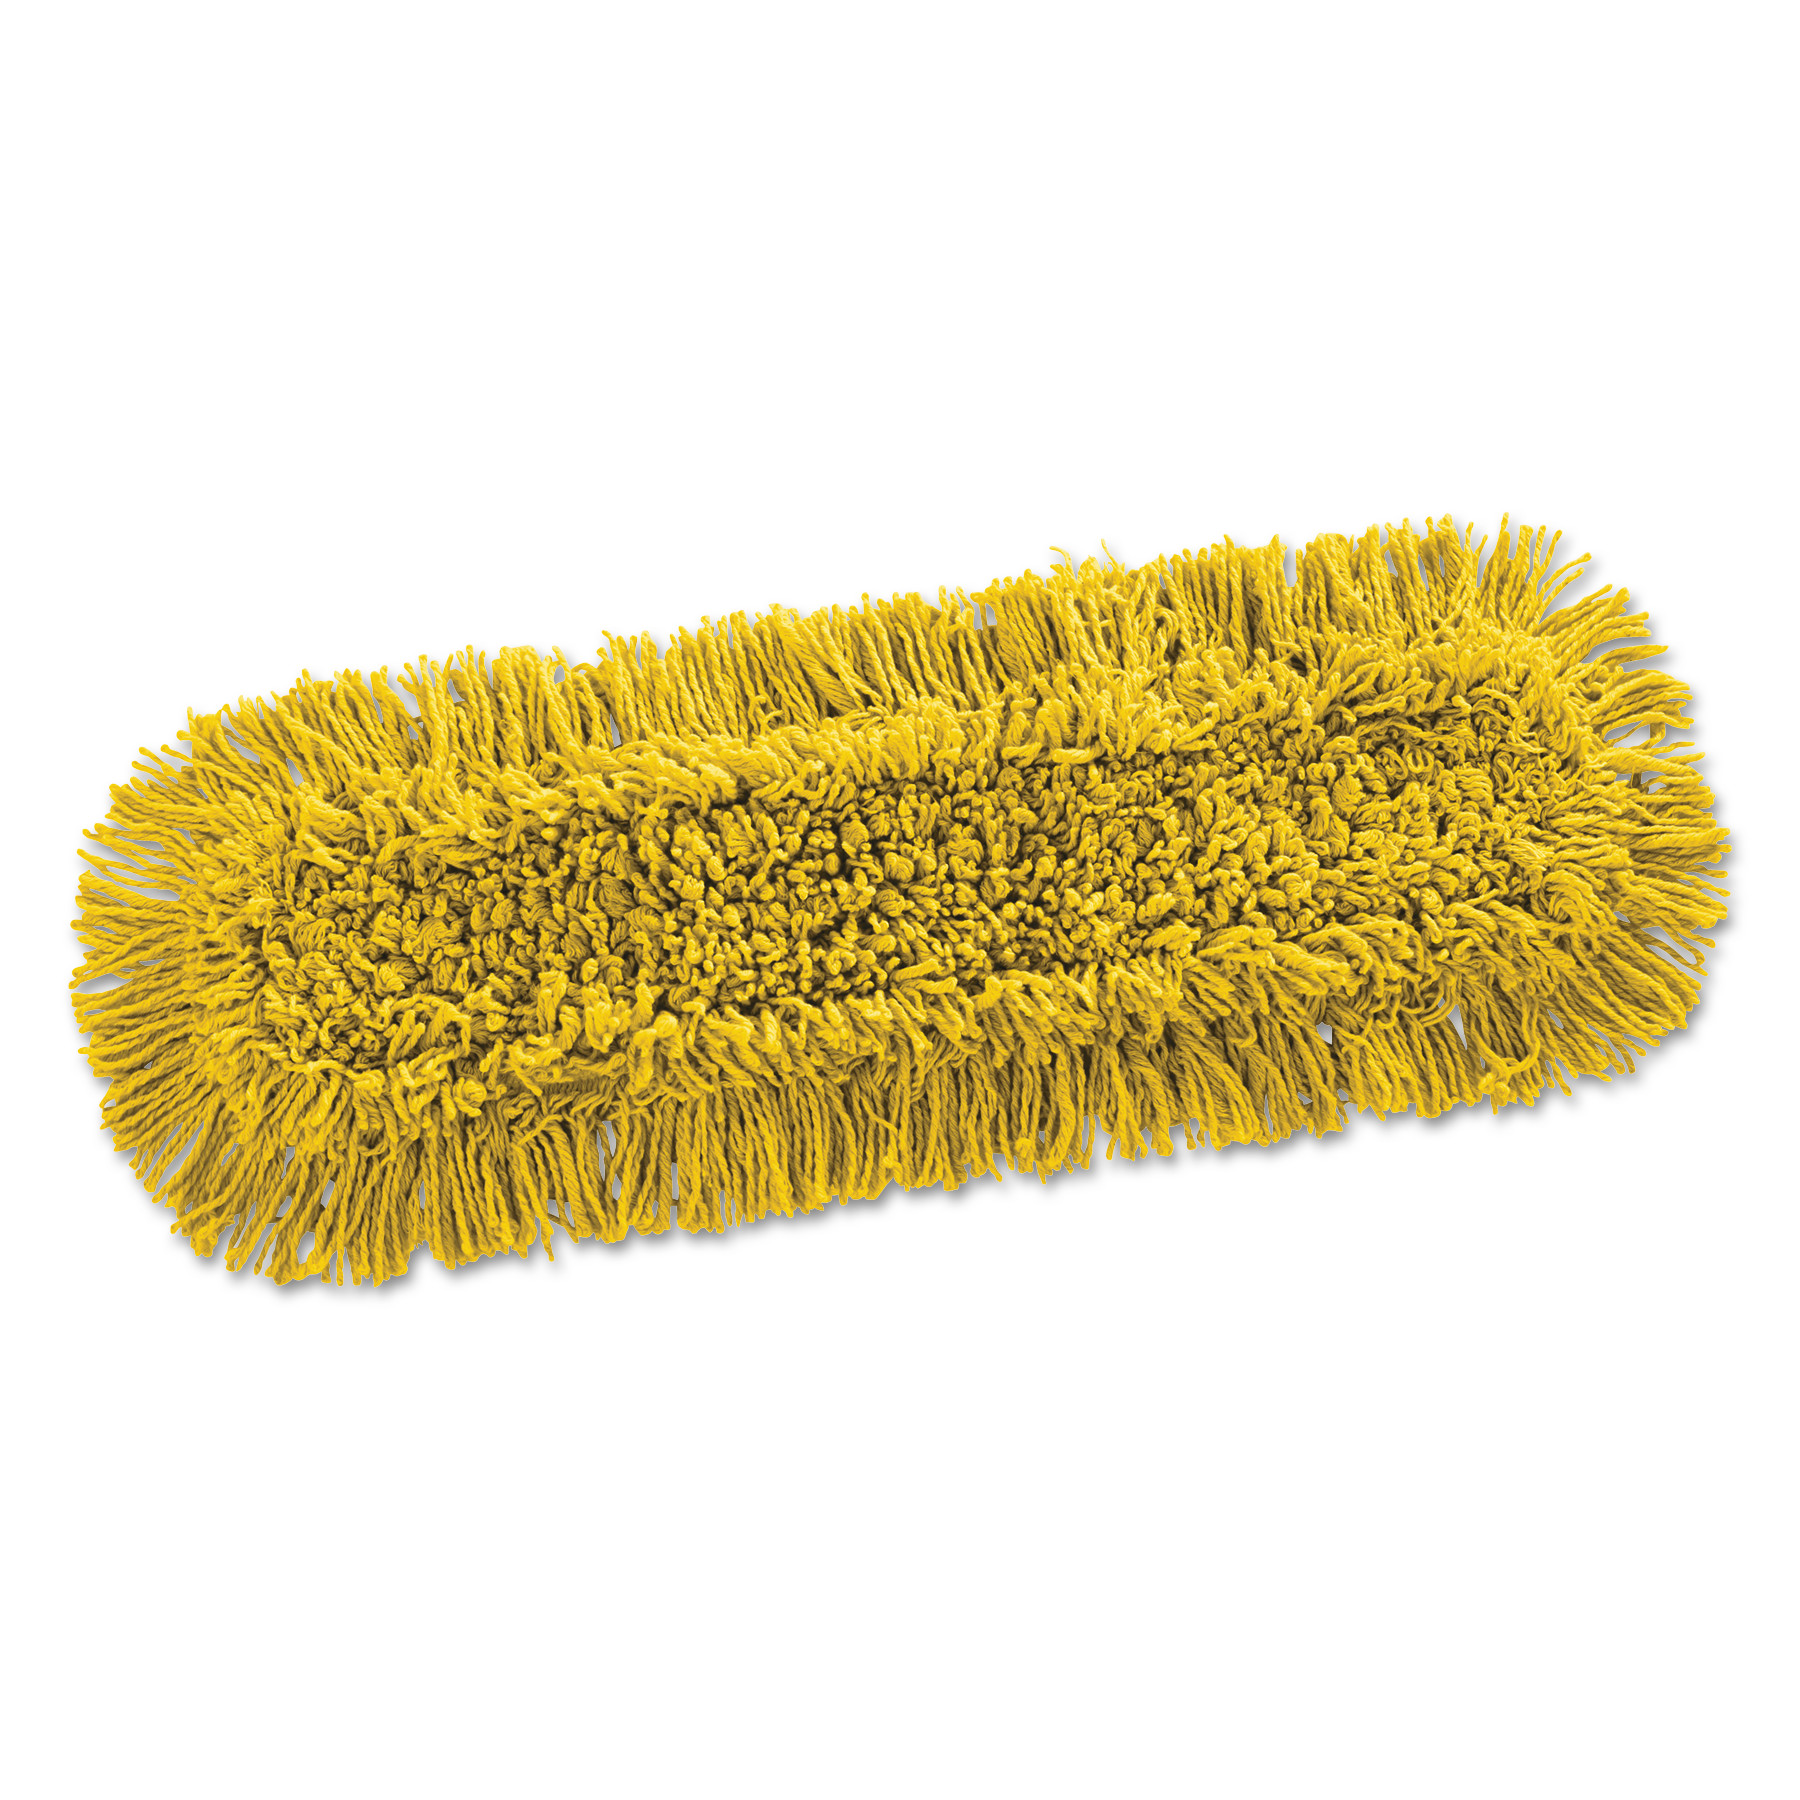  Rubbermaid Commercial 2018810 Maximizer Dust Mop Pad, 24 x 5.5 x 0.5, Yellow (RCP2018810) 